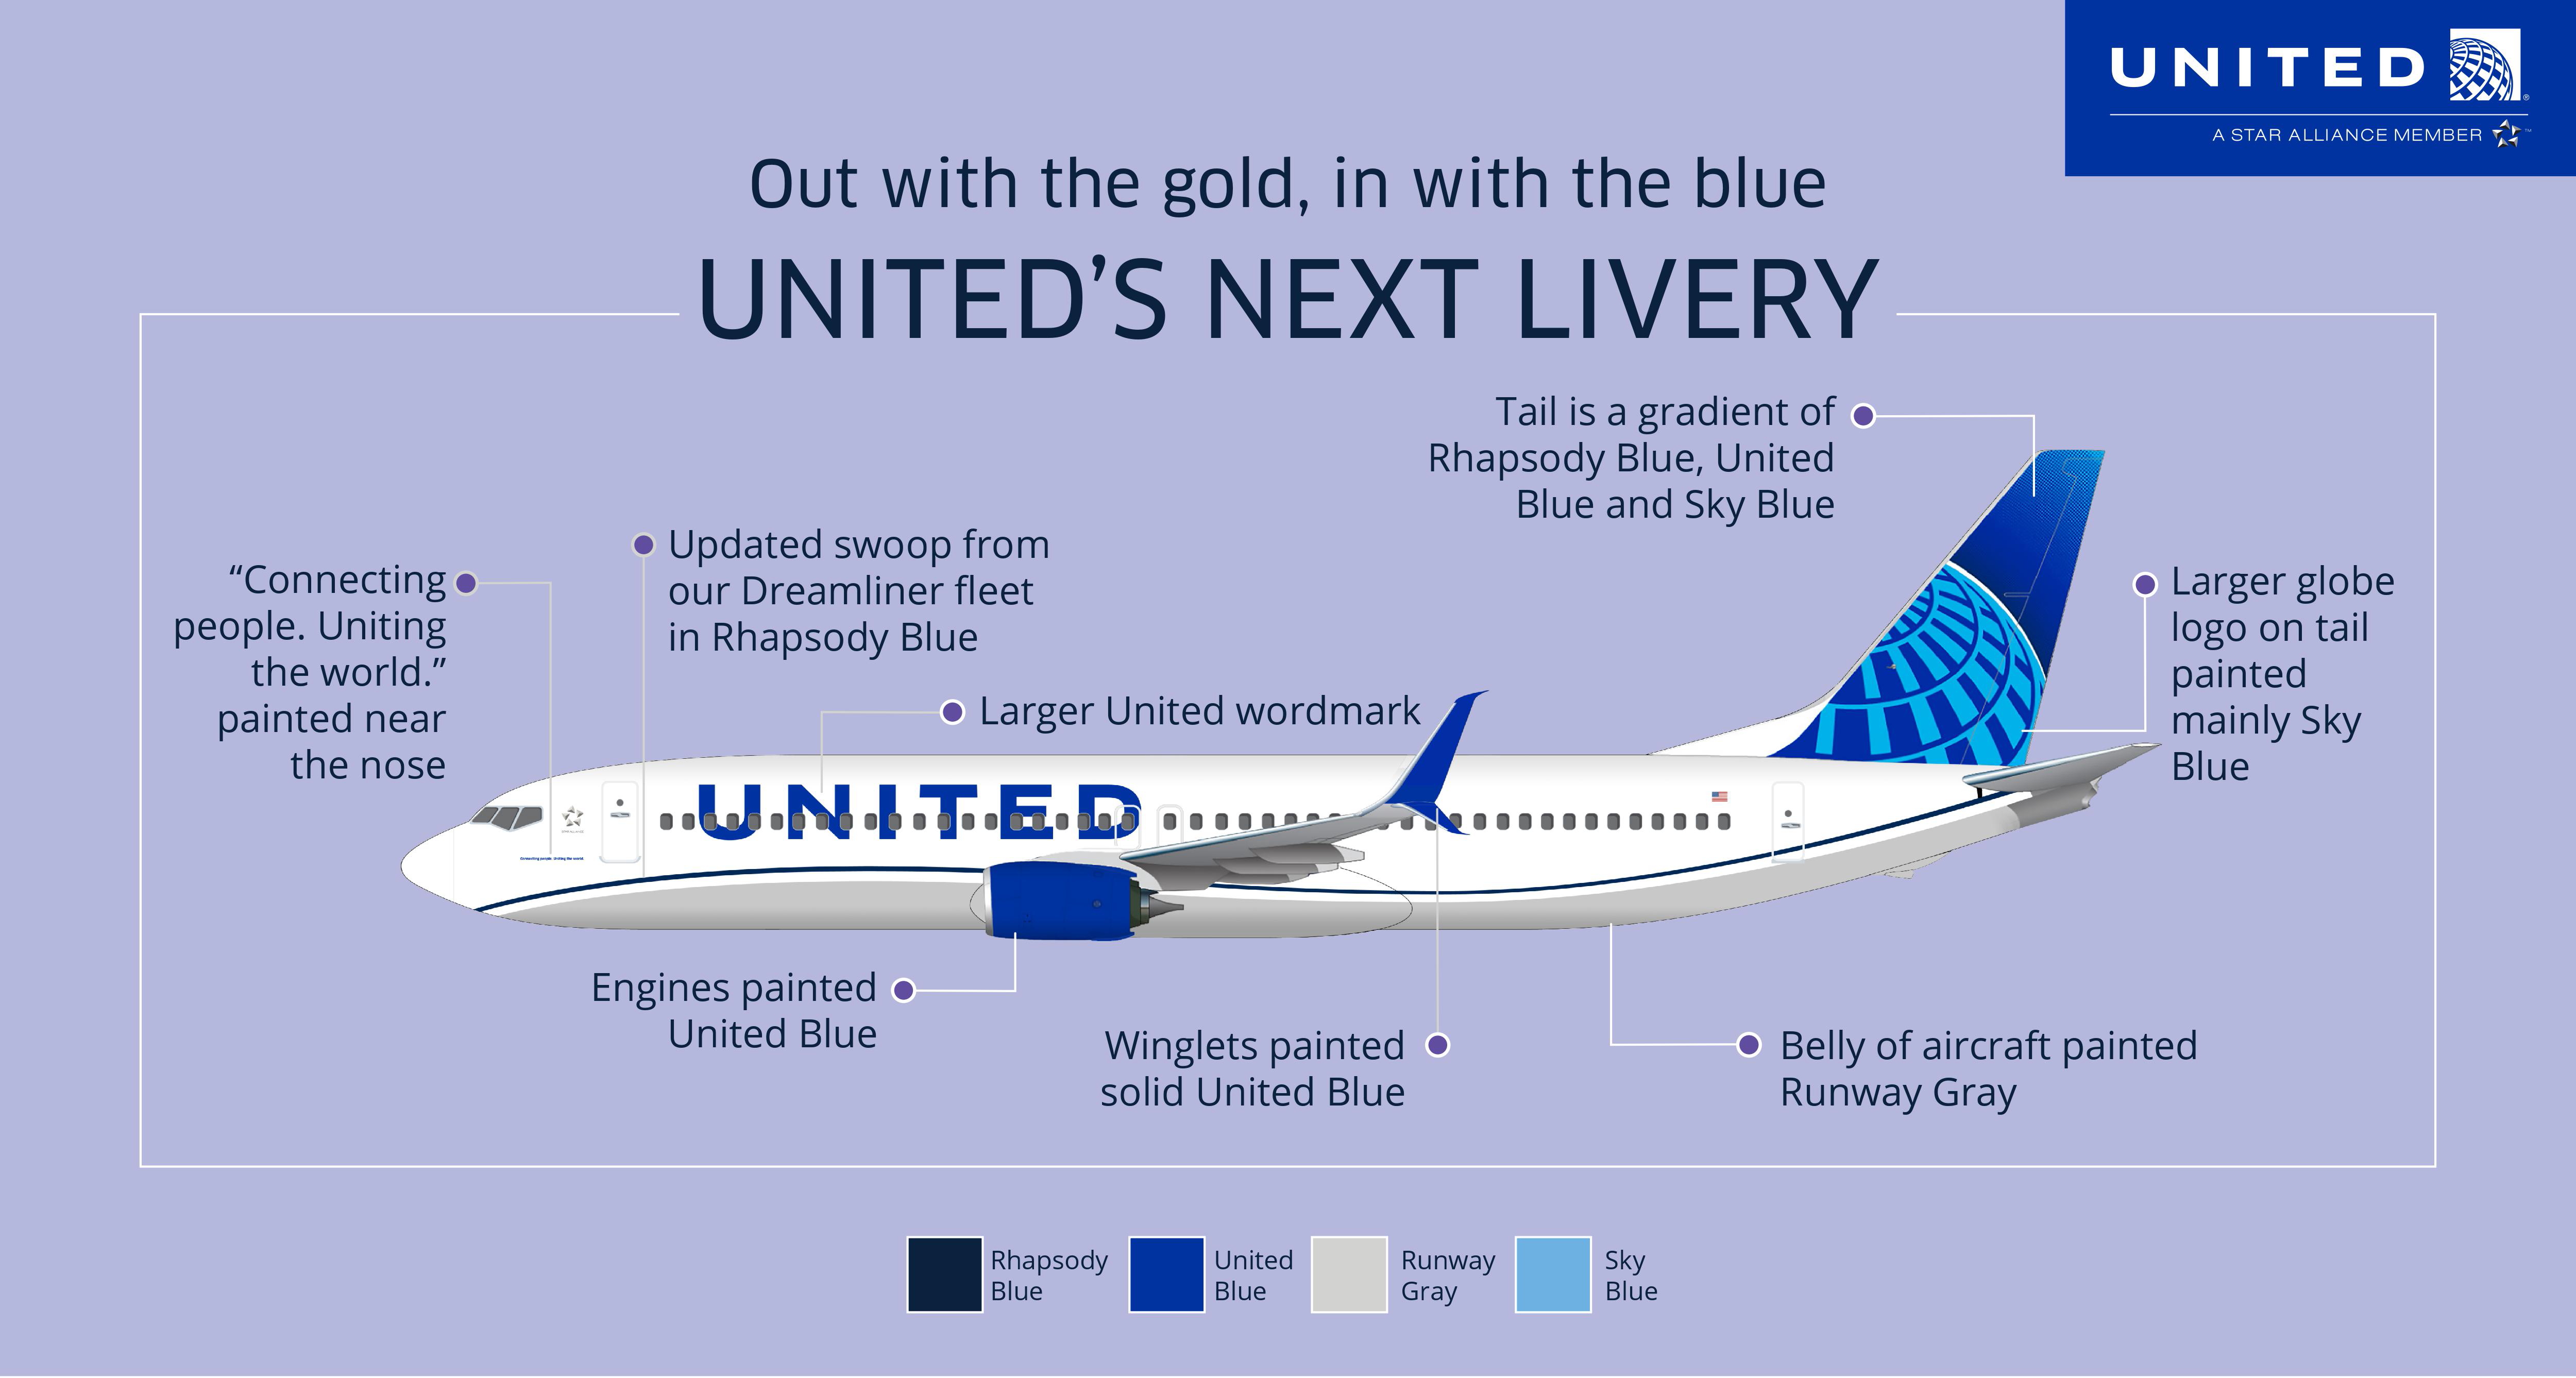 United Airlines has unveiled its new aircraft livery. The first aircraft painted with the new design is a Boeing 737-800, which will be joined by a mix of narrowbody, widebody and regional aircraft with the new livery throughout the year. On average, United aircraft receive new paint jobs every seven years.. Click to enlarge.